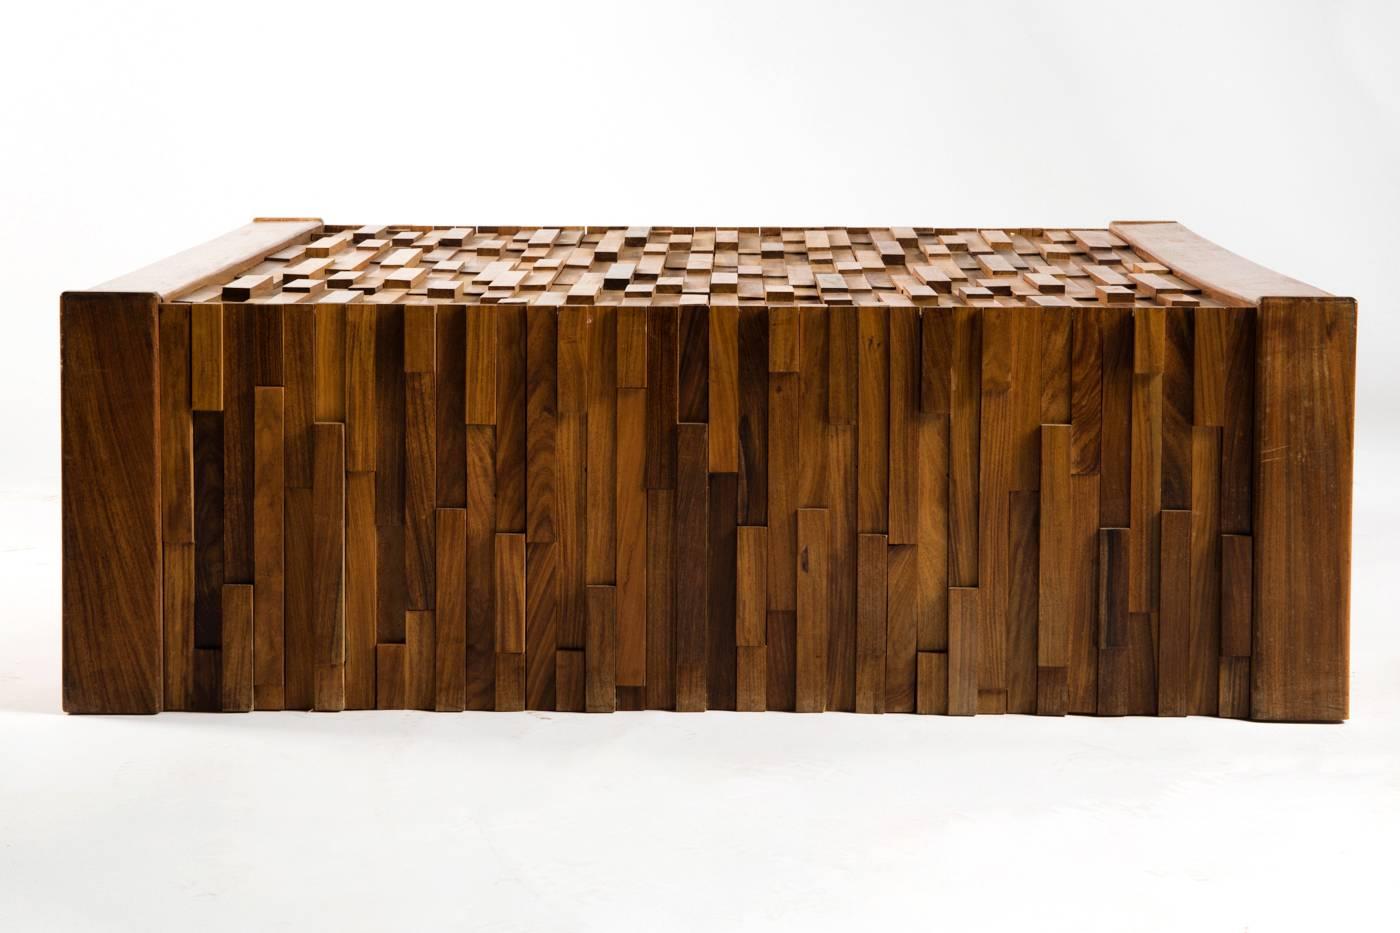 Brazilian modern large coffee table or side table, designed by Percival Lafer for Lafer Furniture Sao Paulo. Construction with frame in darker tropical Brazilian wood, filling of oiled bars of Jacaranda wood.